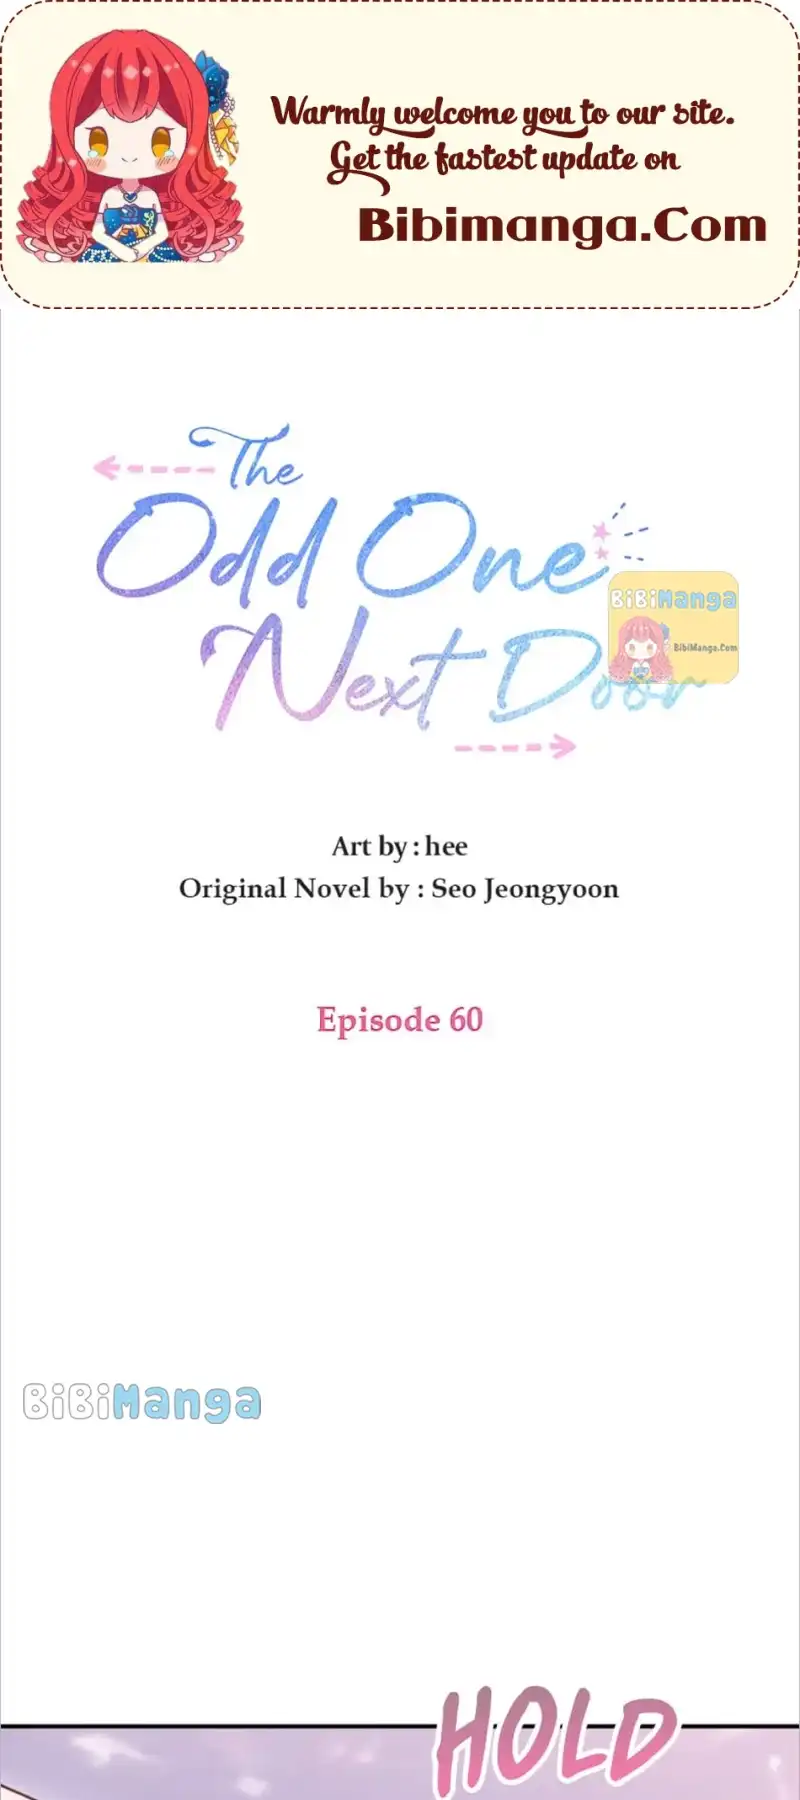 The Odd One Next Door Chapter 60 - page 1